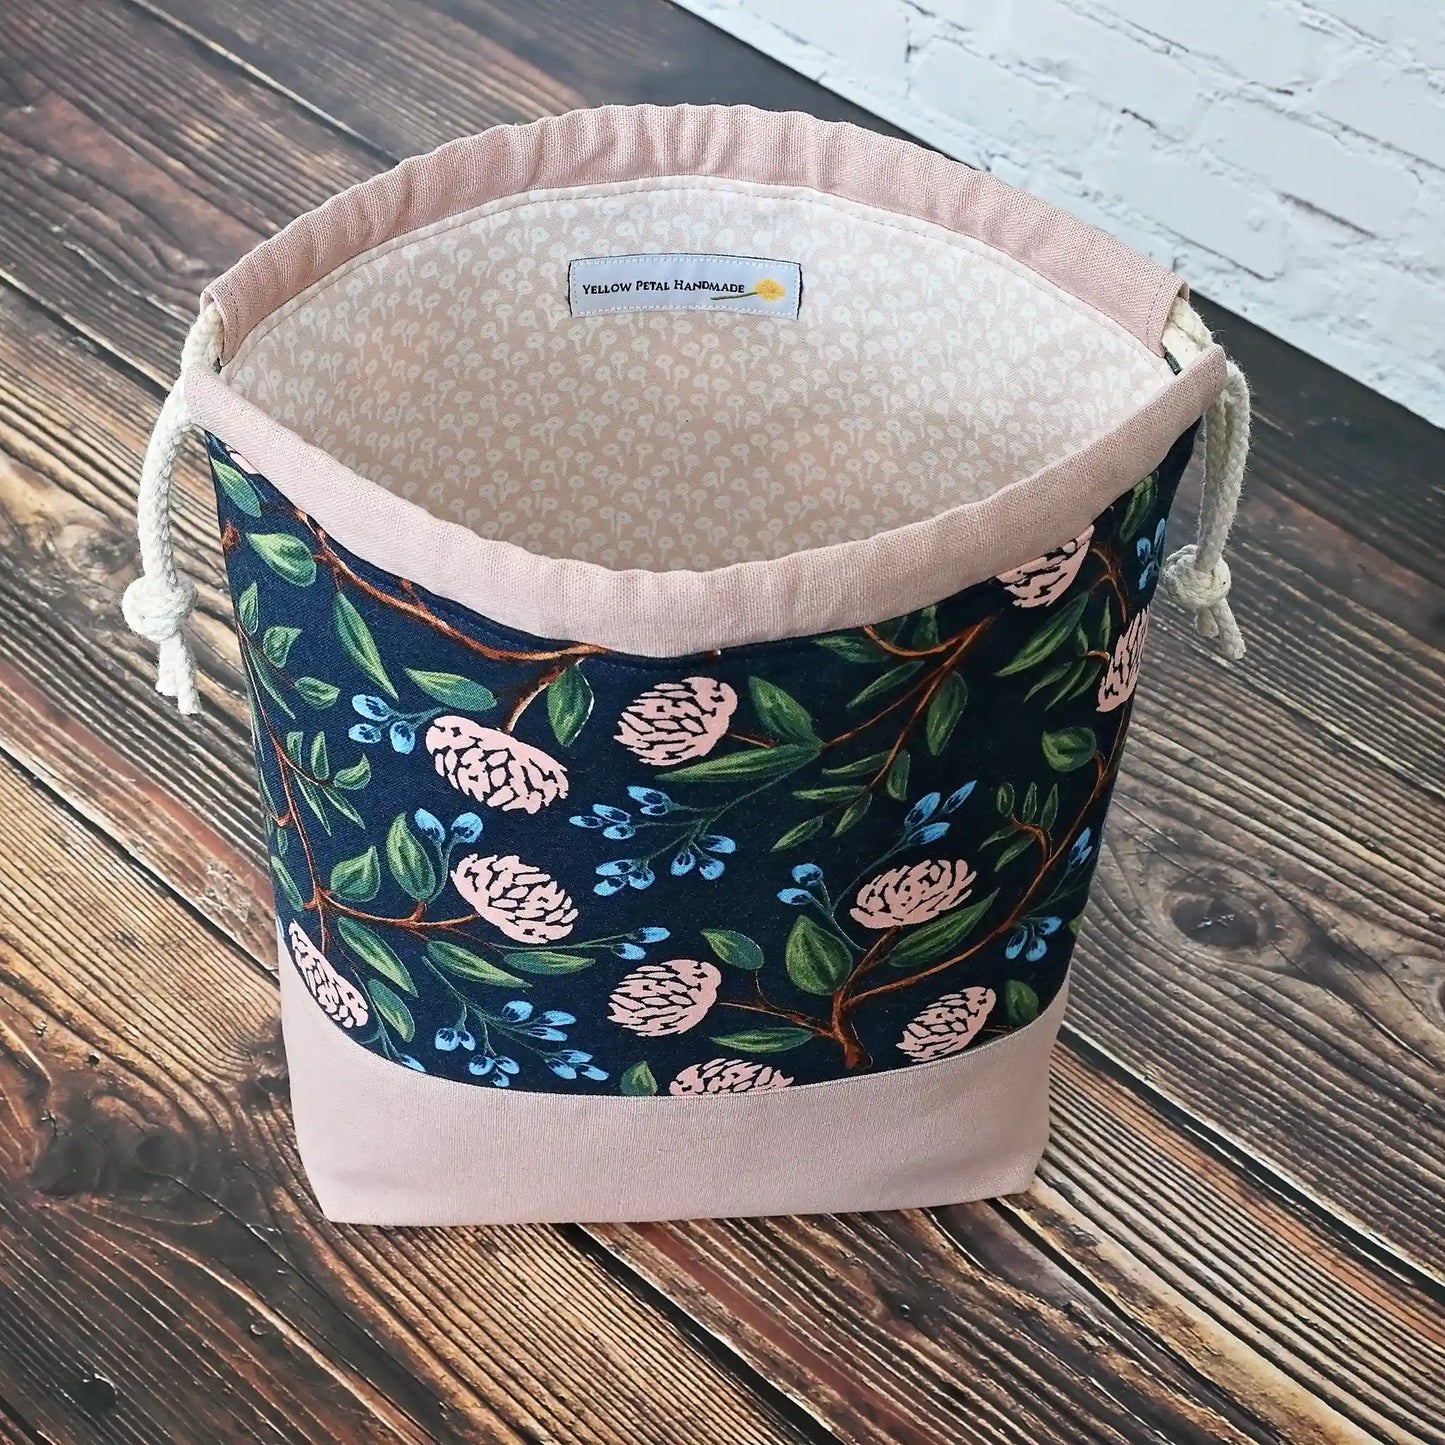 Pretty drawstring project bag made from a navy cotton with pink peonies and paired with a matching pink linen bottom.  Available with or without pockets.  Made by Yellow Petal Handmade in Nova Scotia, Canada.